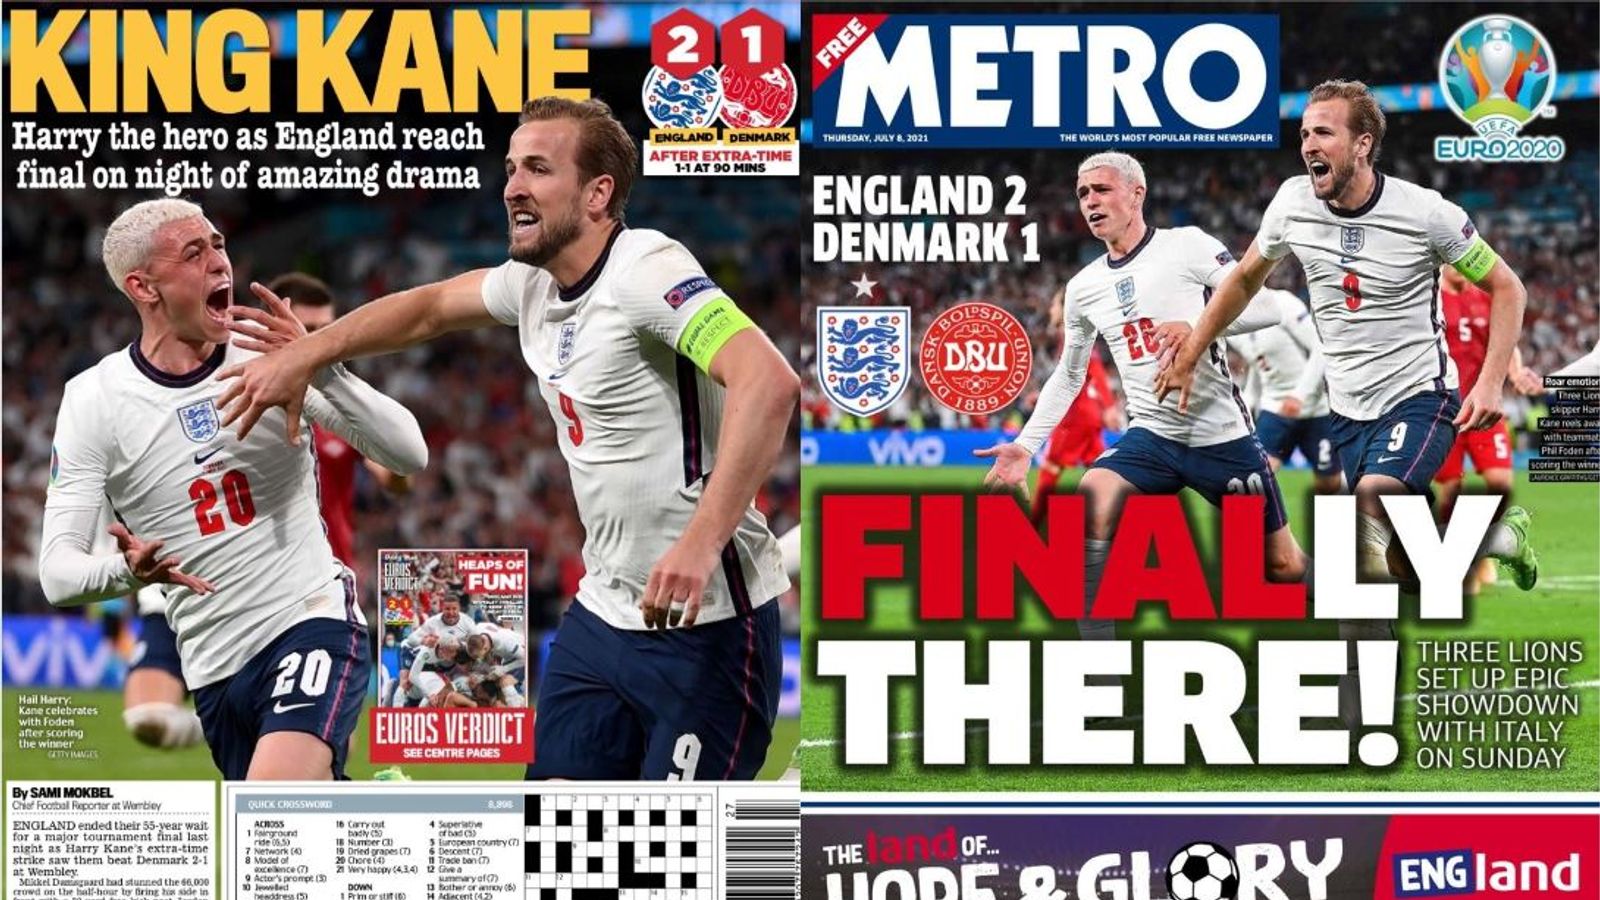 england-teams-hero-harry-kane-leads-three-lions-into-their-first-euro-final-in-the-history